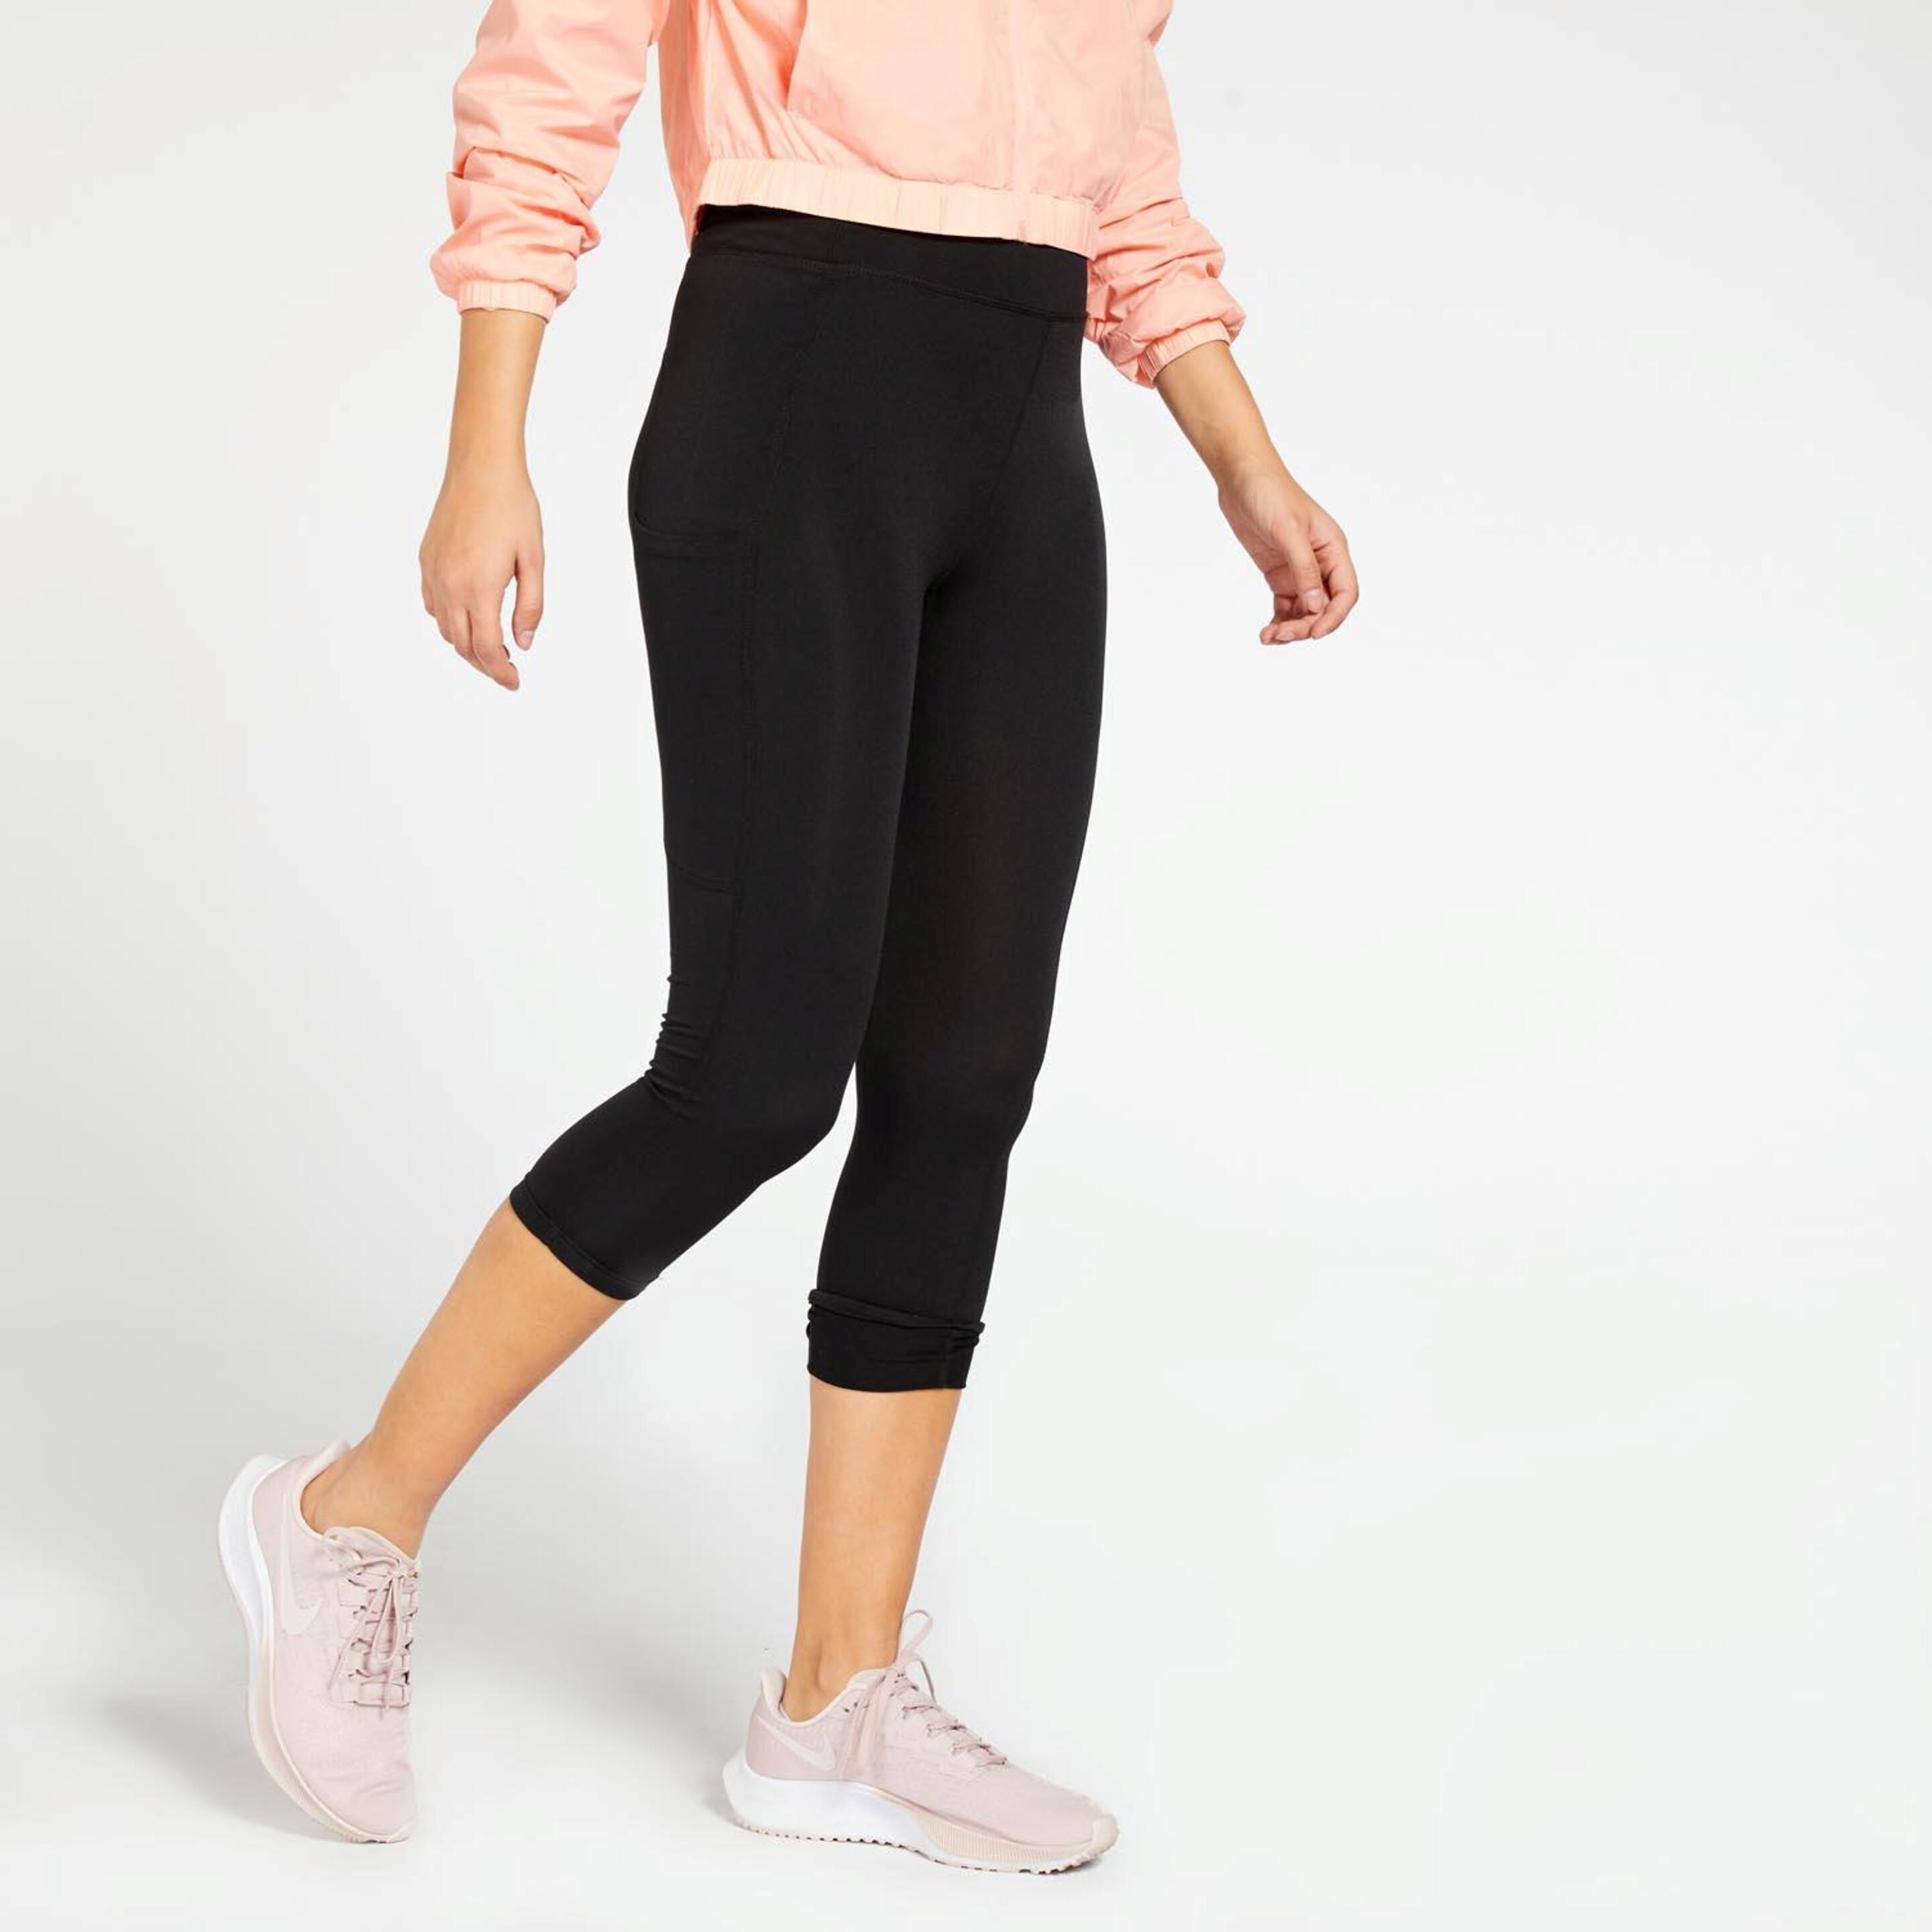 Doone Supportive - negro - Mallas Fitness Mujer